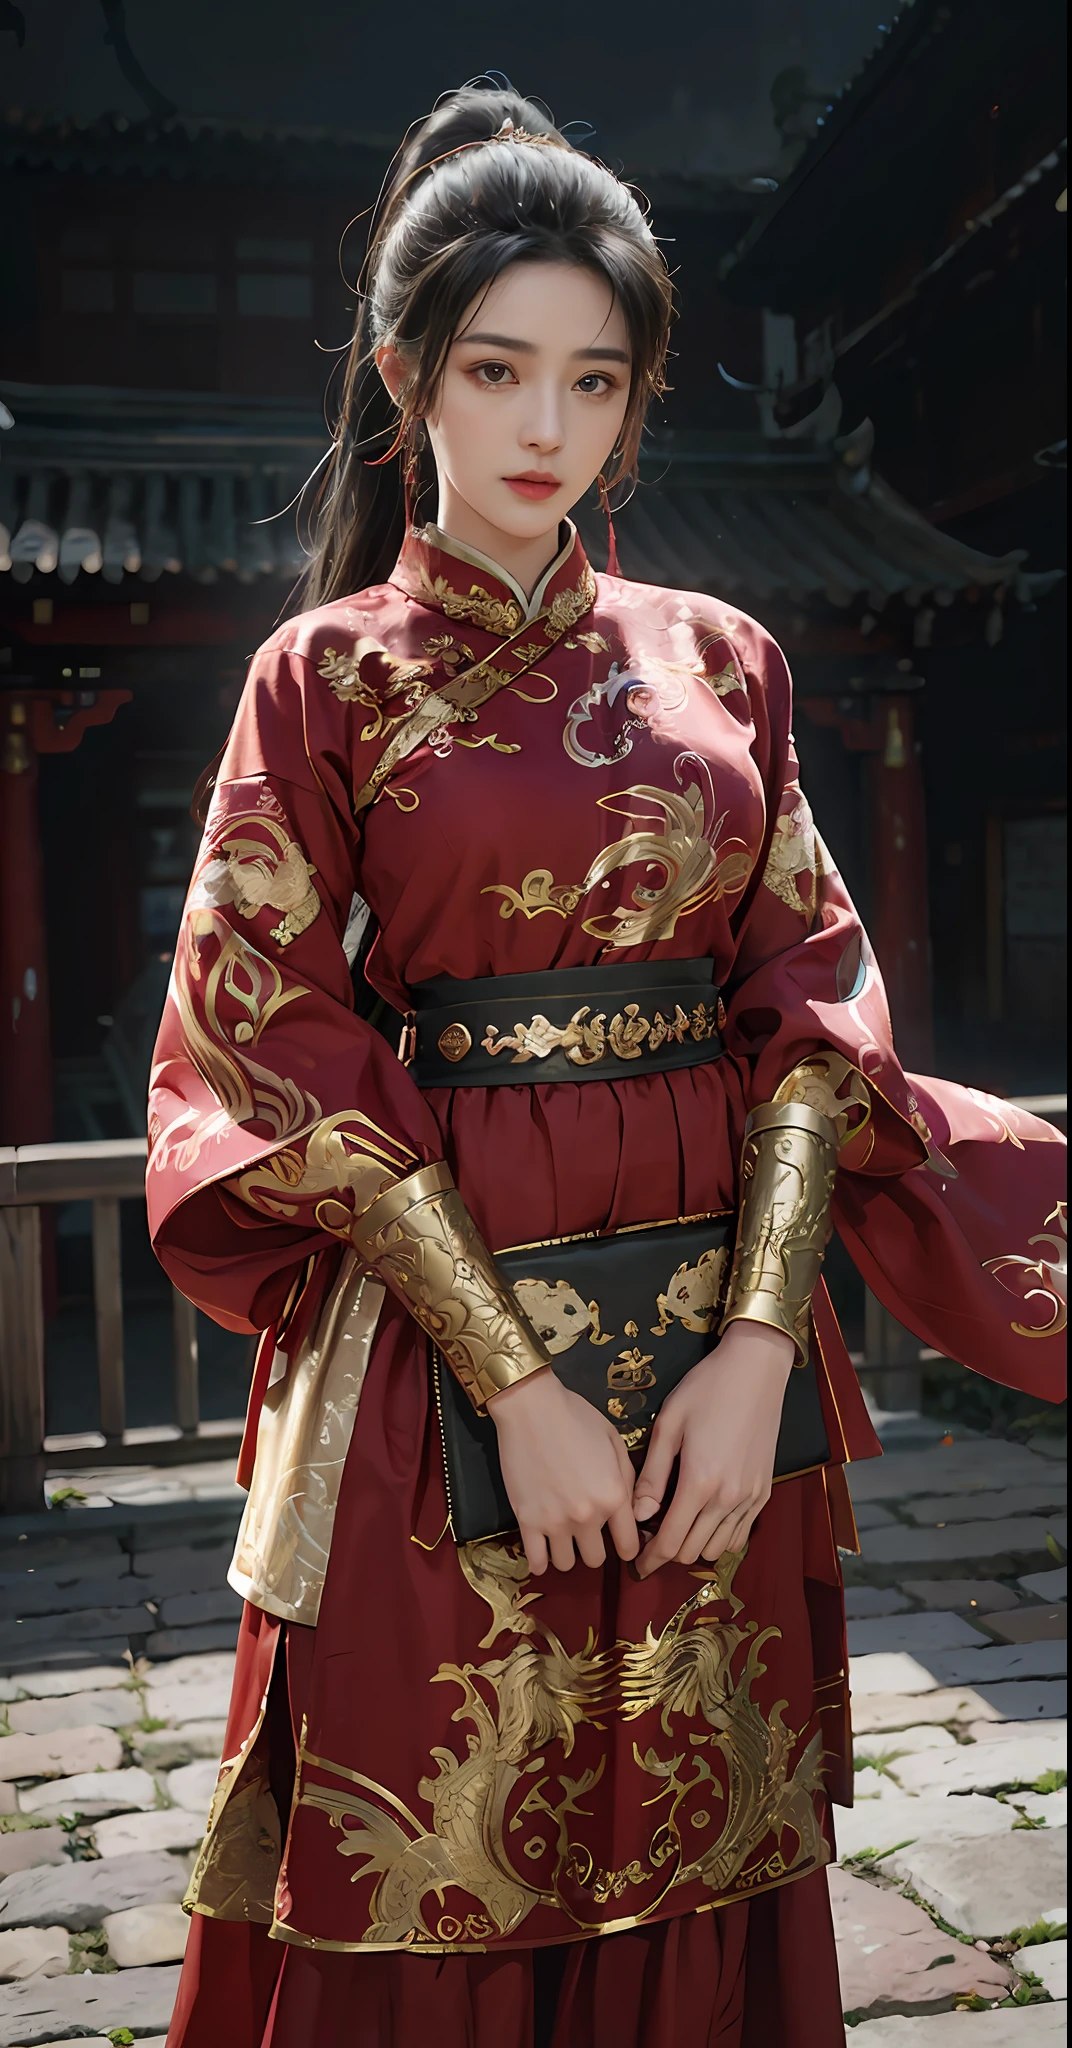 feiyu_clothes， red-fabric， gold embroidery， Gold embroidered black bracer， high ponytails， depth of fields， night cityscape， 1girll， ulzzang-6500v1.1， （Original： 1.2）， （Realistic： 1.3） ， beautiful girl with beautiful details， extremelydetailedeyesandface， Eyes with beautiful details， absurderes， Incredibly Ridiculous res， hugefilesize， Hyper-detailing， A high resolution， ultra - detailed， best qualtiy， tmasterpiece， illustration， Ultra detailed and beautiful， ultra - detailed， CG， Solidarity， 8k wallpaper， astounding， finedetail， tmasterpiece， top-quality， offcial art， Extremely detailed Cg Unity 8K wallpaper， cinmatic lighting， （Perfect shiny skin：0.6）， Slim and smooth lines， （floatking）， （little breast：1）， 耳Nipple Ring ， tmasterpiece， Best quality at best，